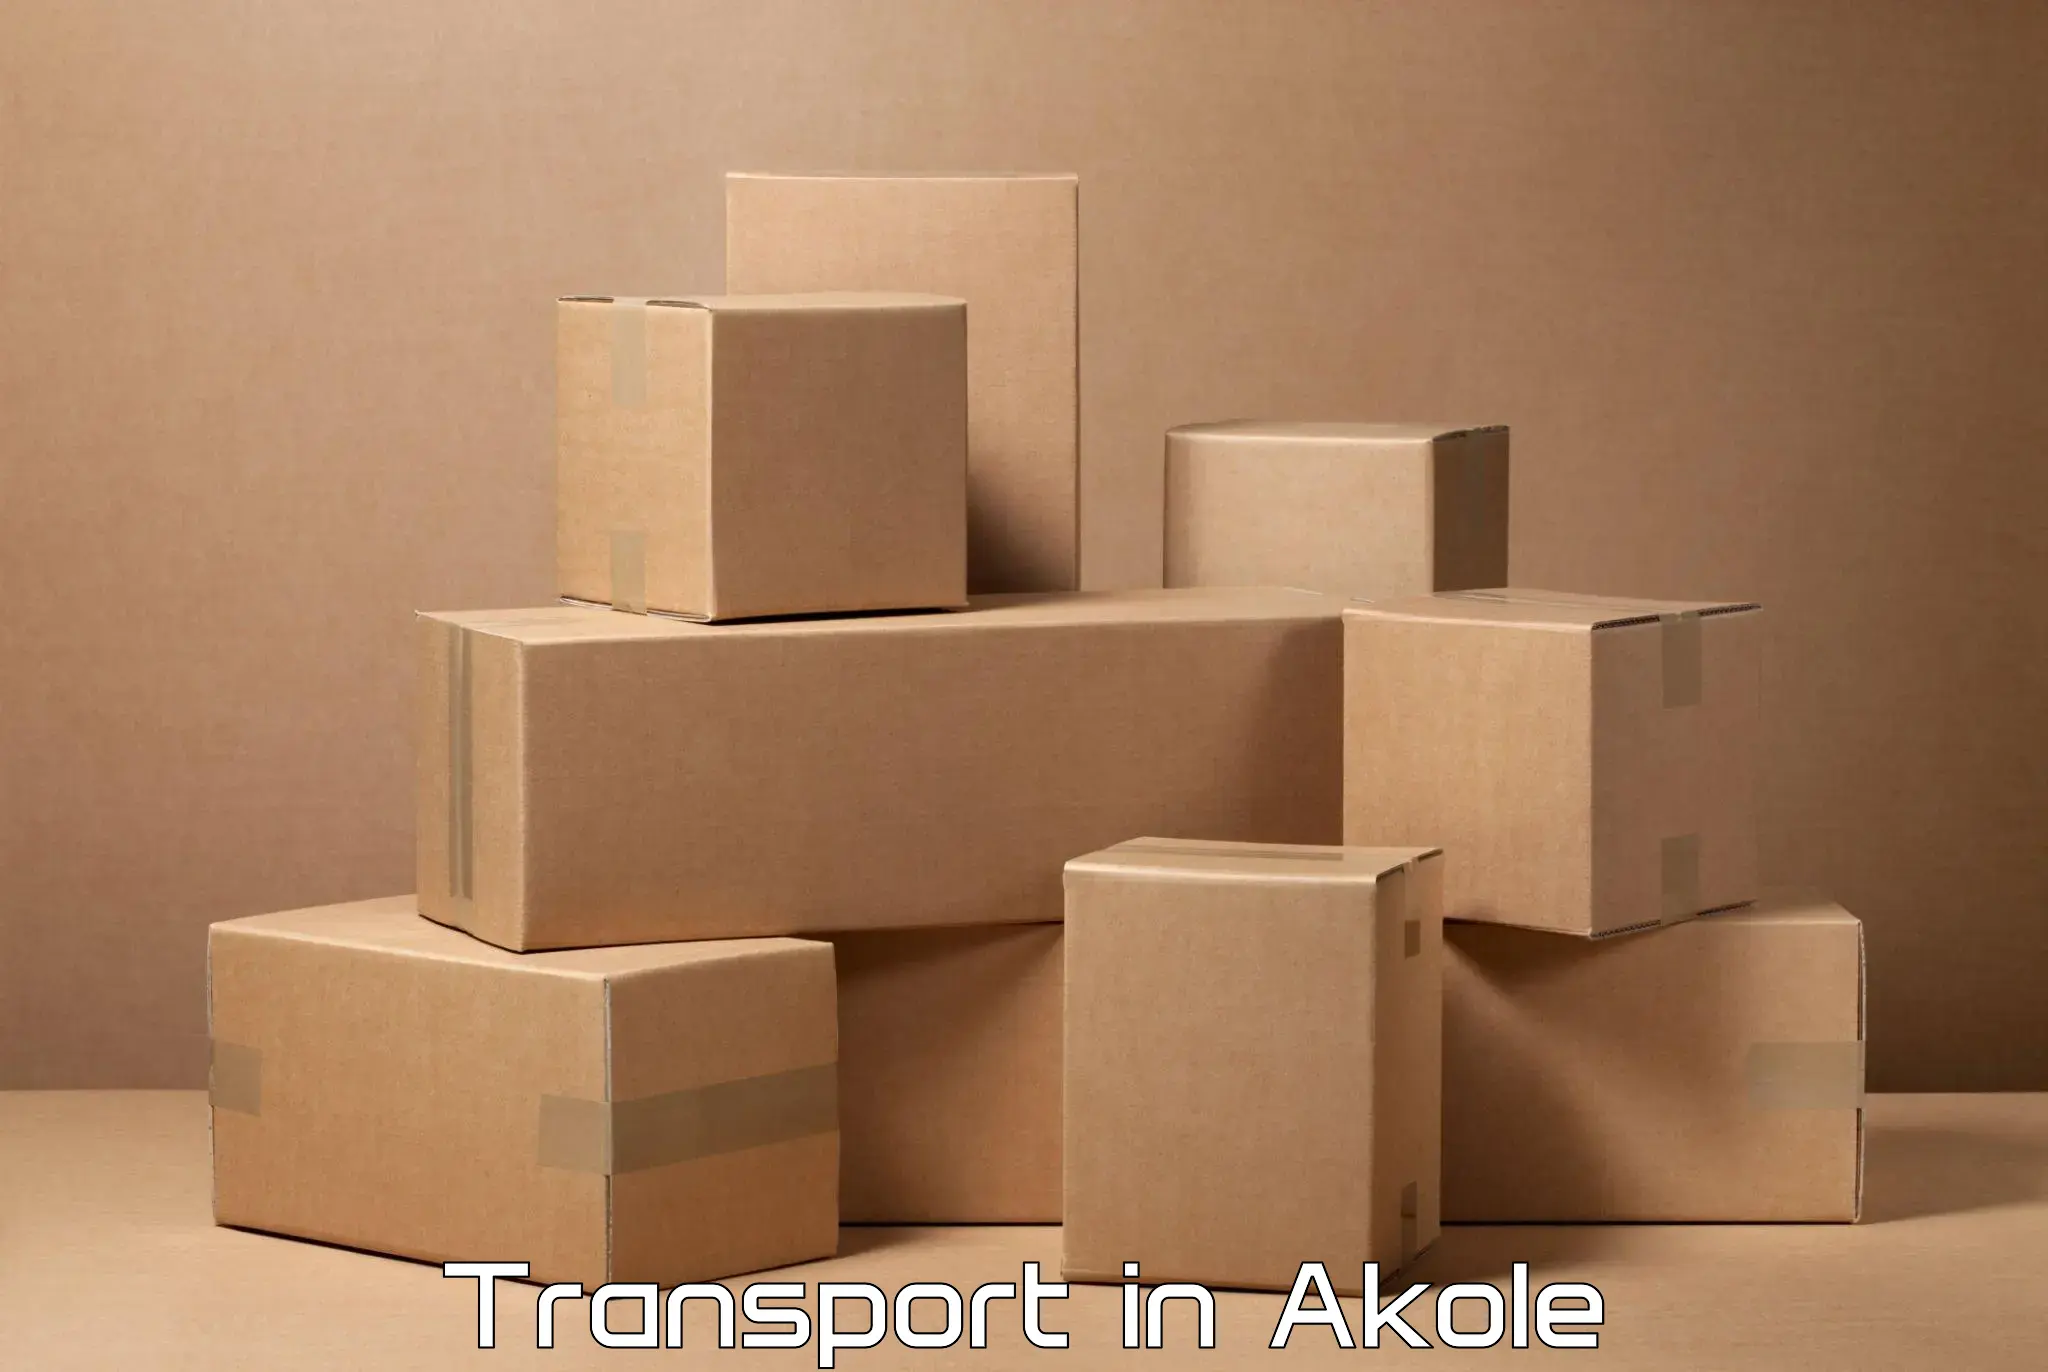 Road transport services in Akole